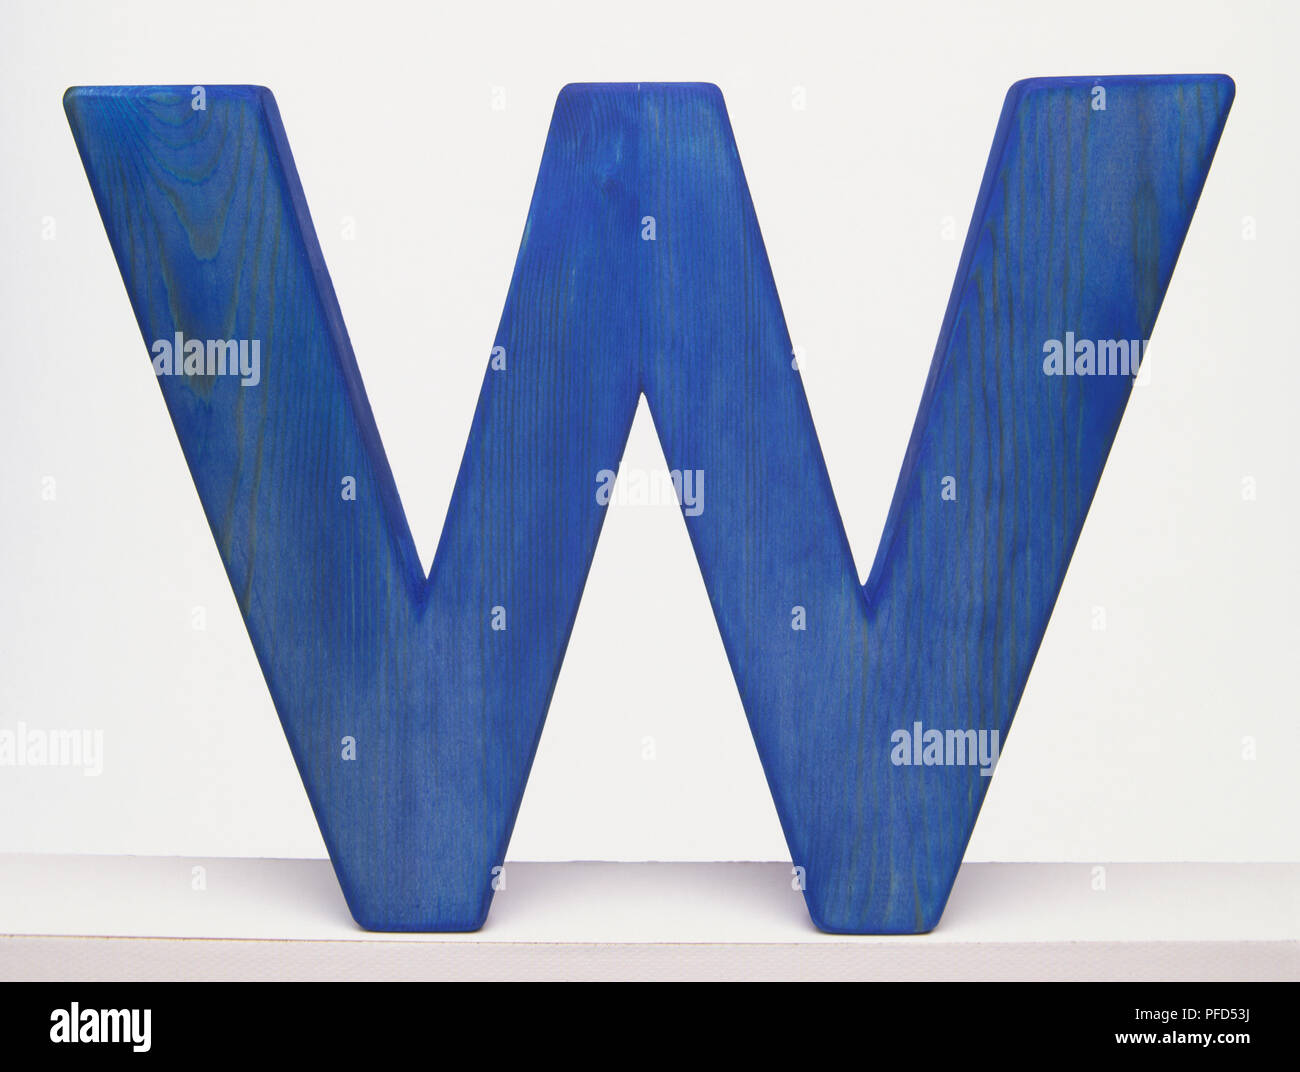 Blue wooden letter 'w' Stock Photo